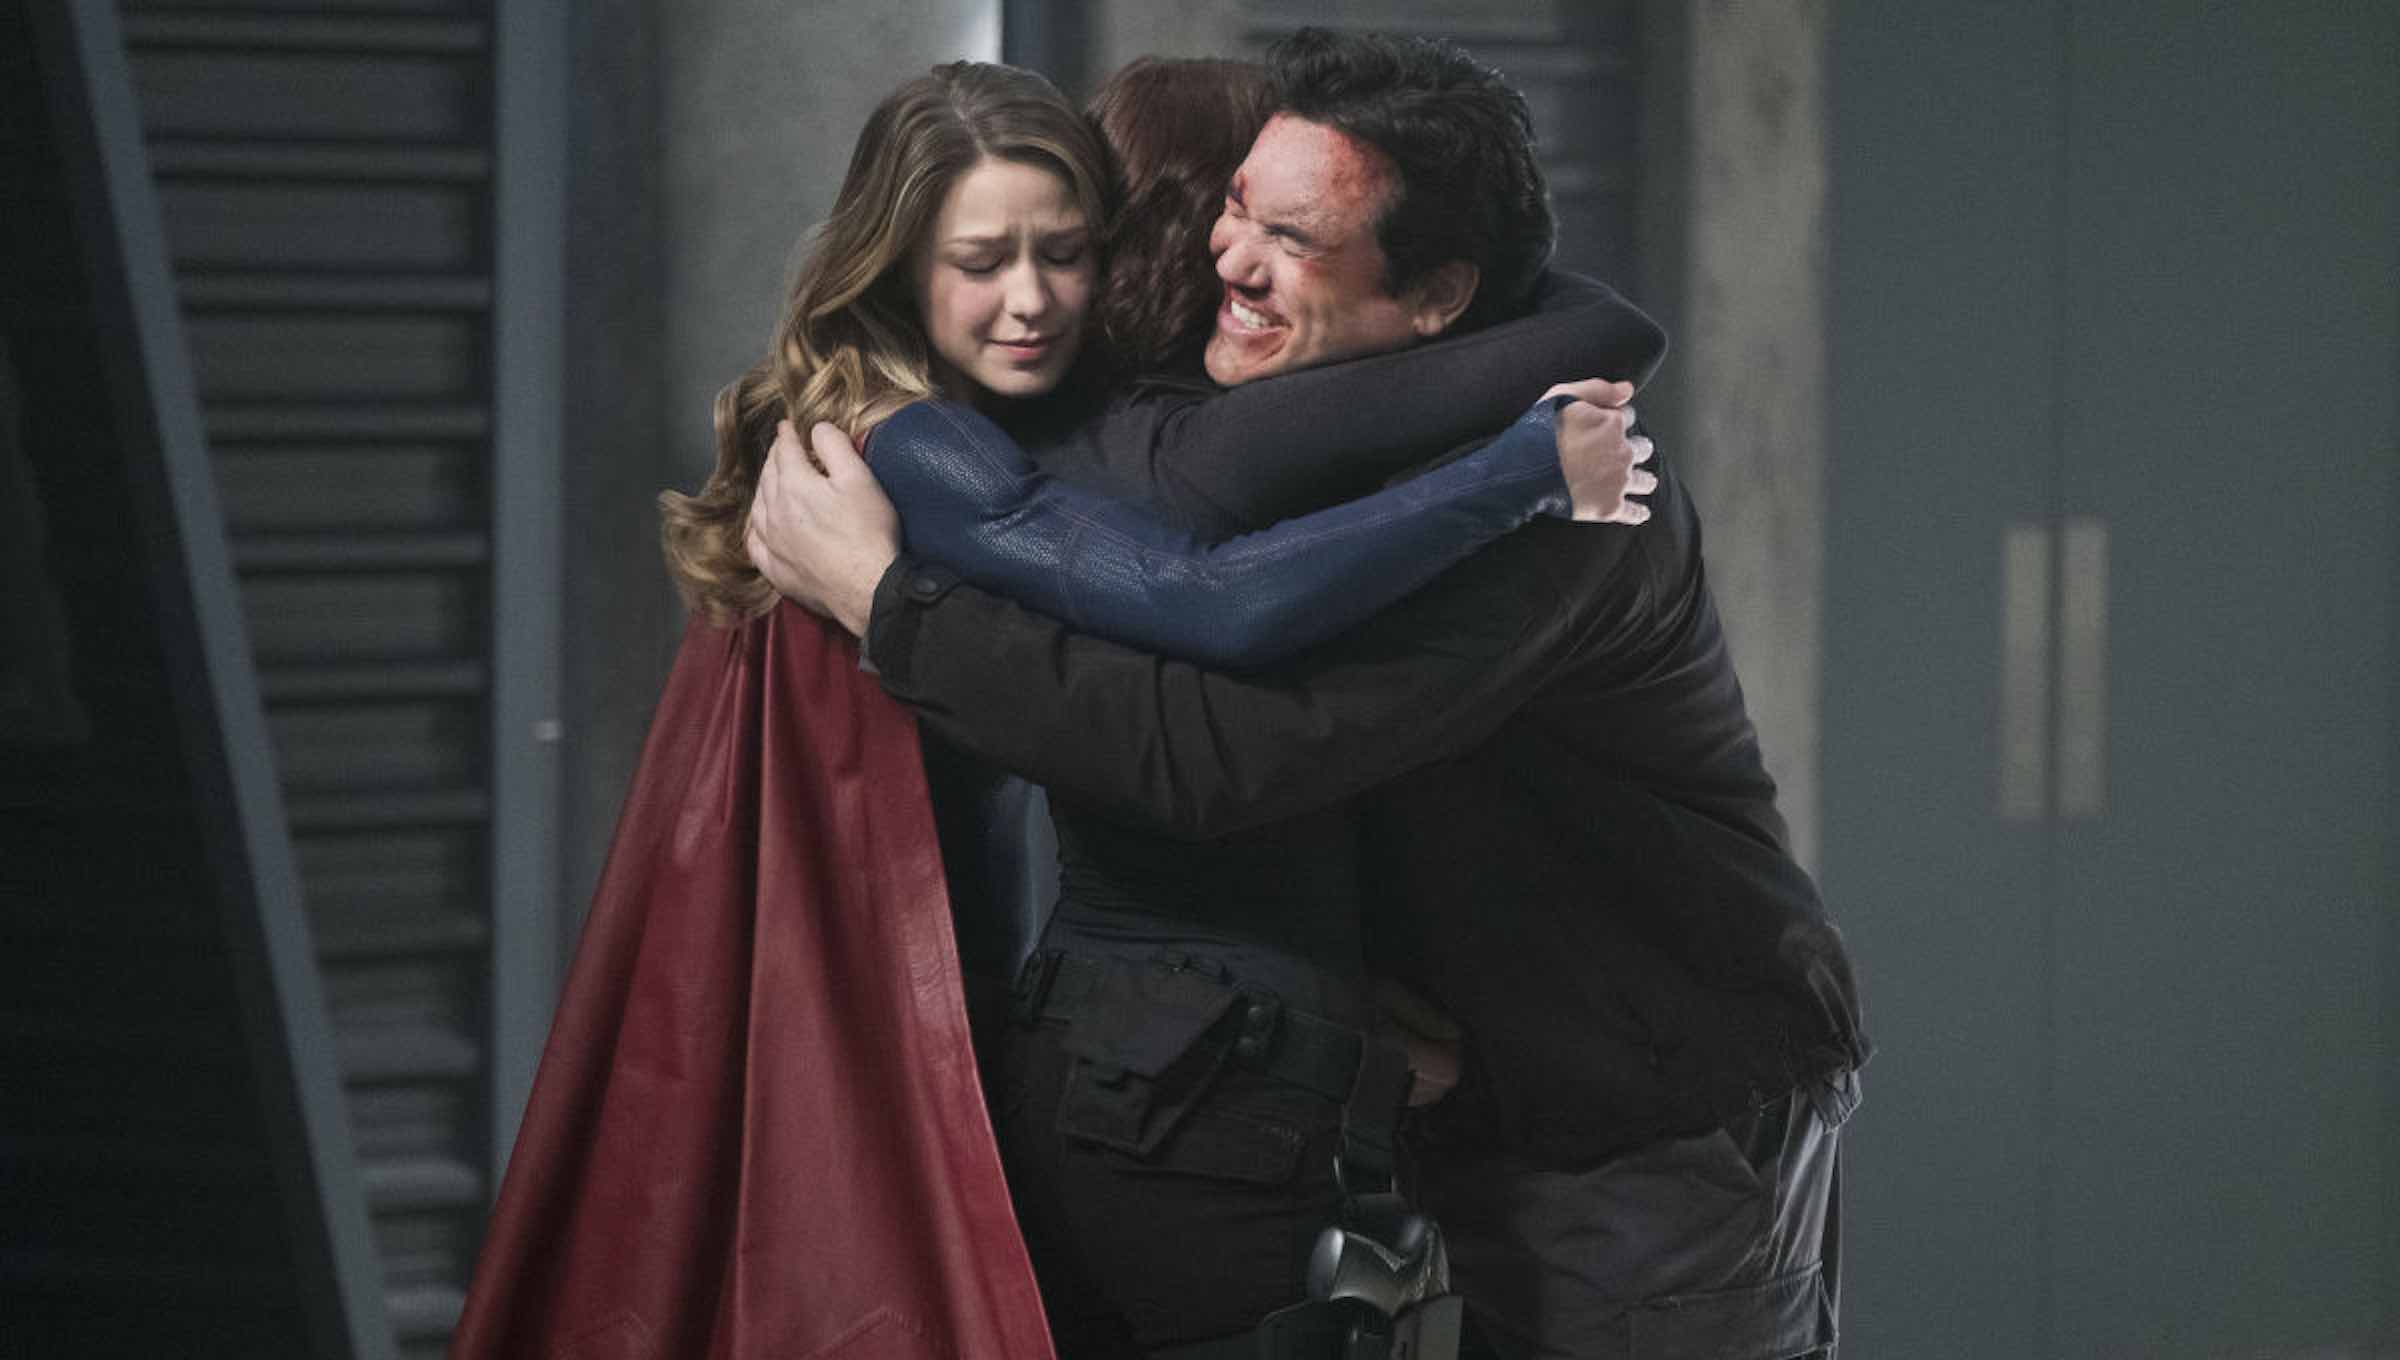 'Supergirl' season 5 featured some tender family moments. Take our quiz and find out whether you have what it takes to join the family.